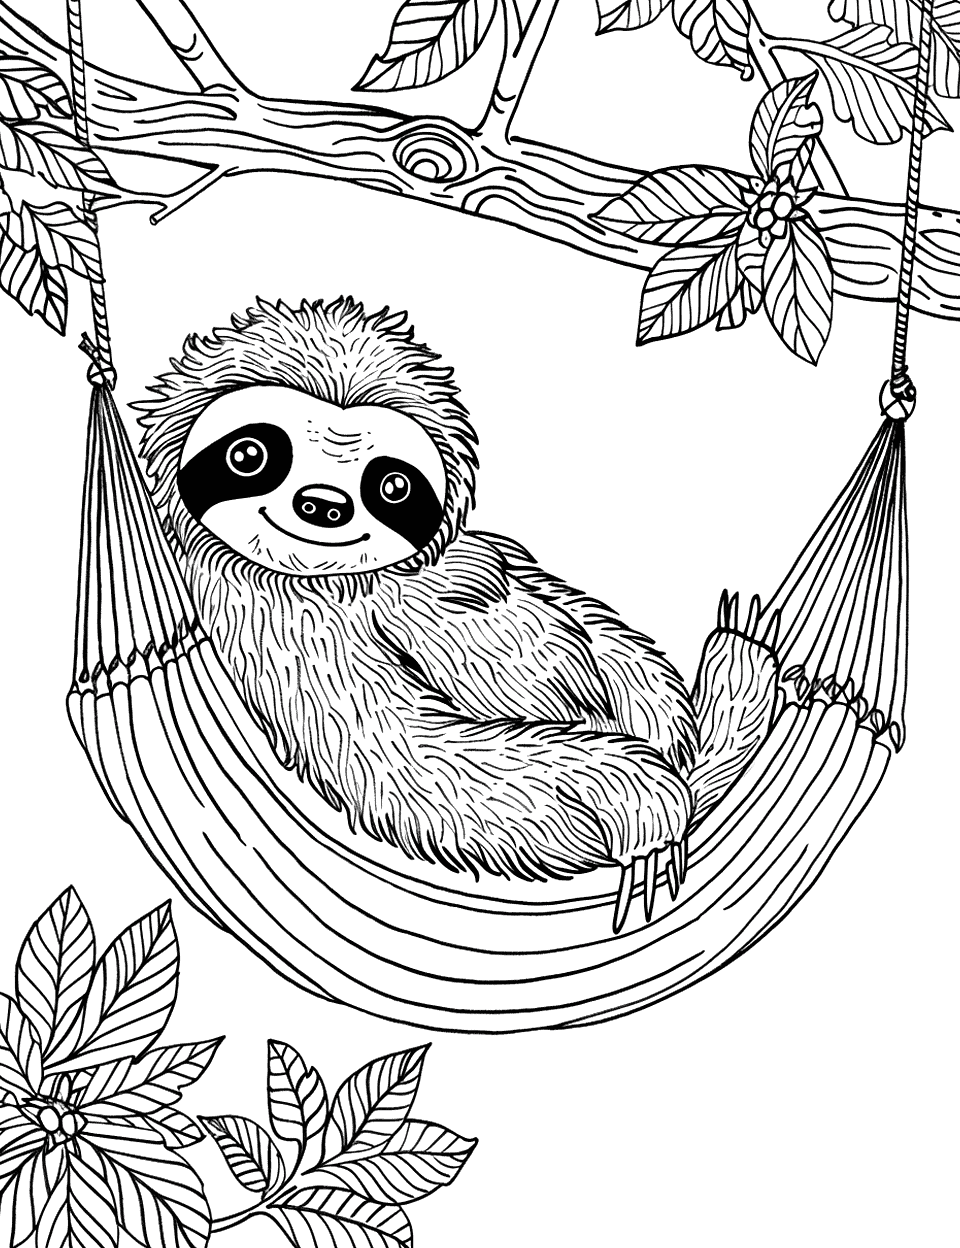 Sloth in a Hammock Coloring Page - A sloth relaxing in a hammock.